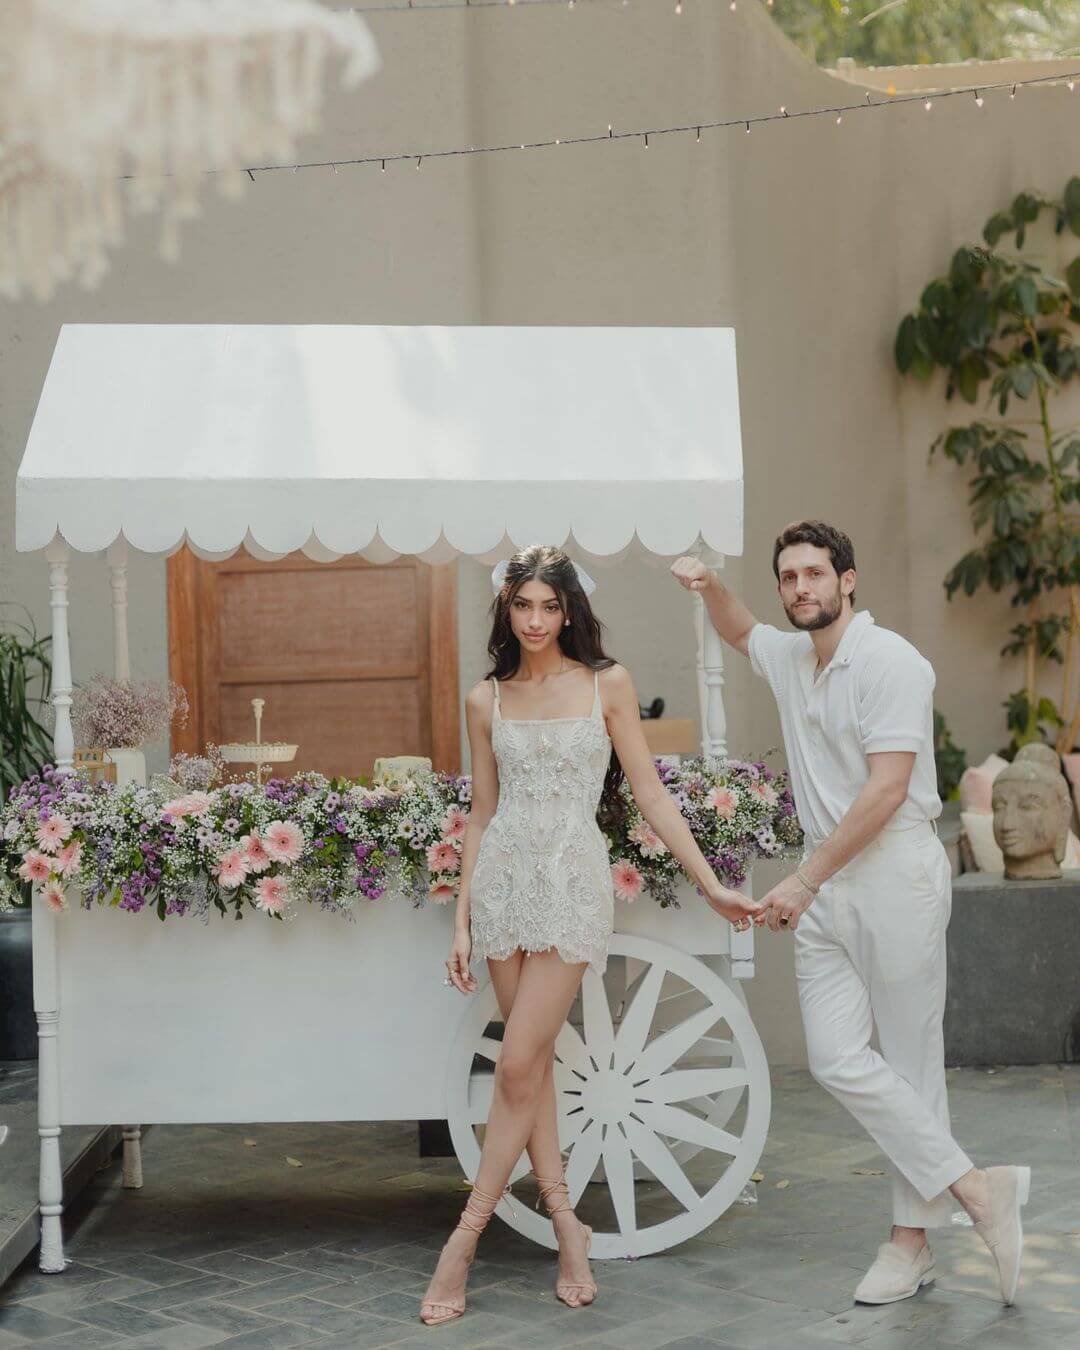 Ananya Panday's Cousin Alanna Panday Is All Set To Marry Her Boyfriend Ivor Mccray